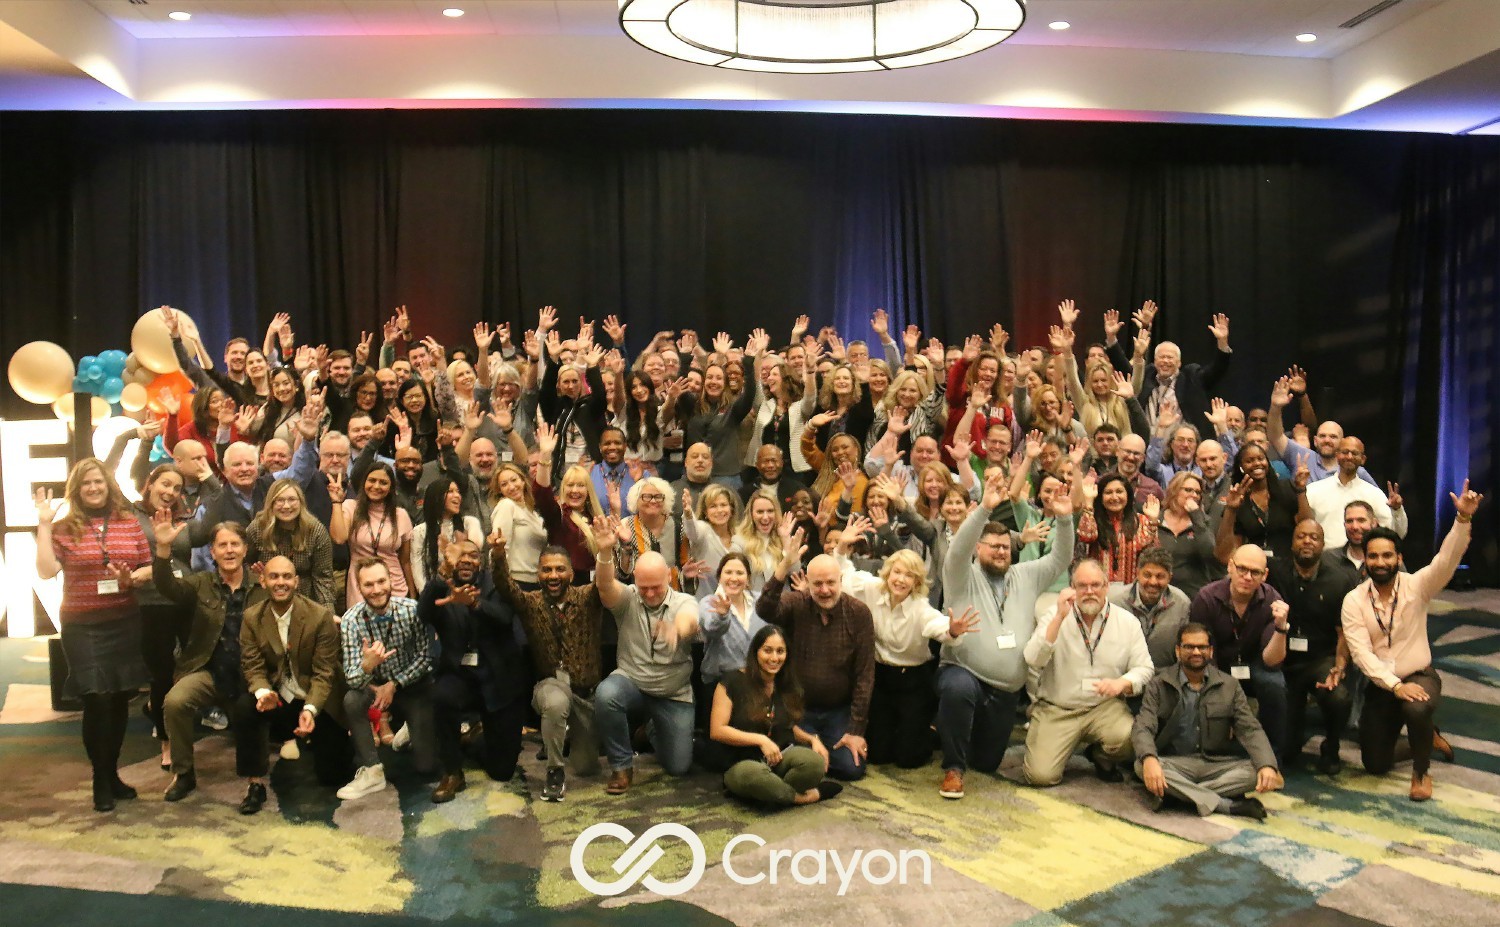 Greetings from the Crayon US team! Crayon US Company Kickoff event, March 1, 2023